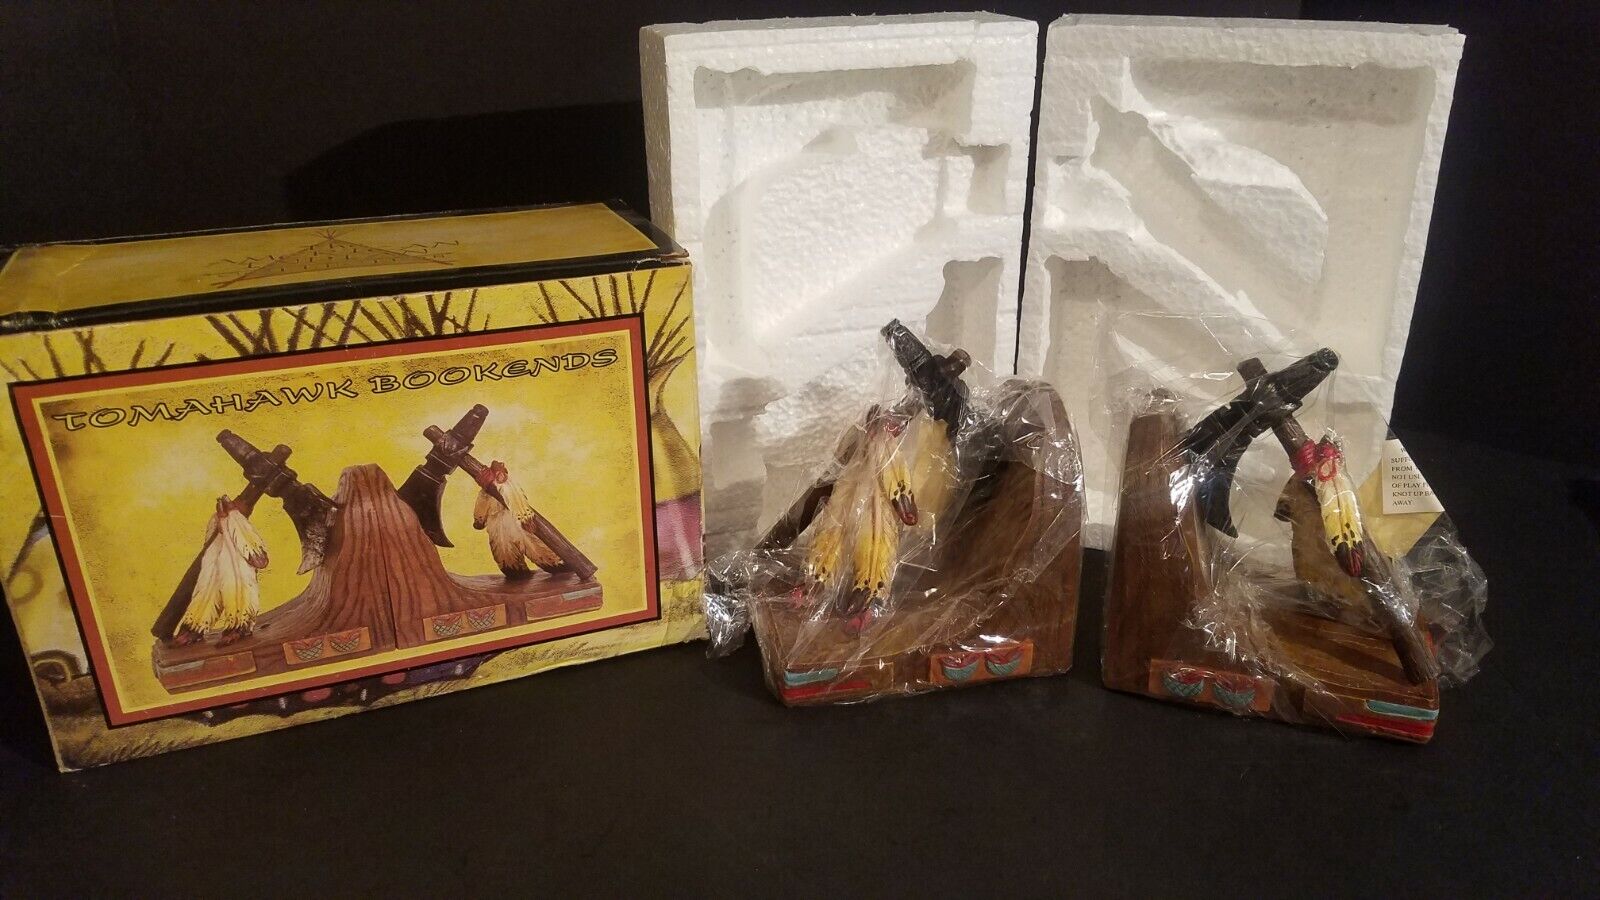 NEW IN BOX Tomahawk Book Ends 2003 By Trippie\'s Resin 6\